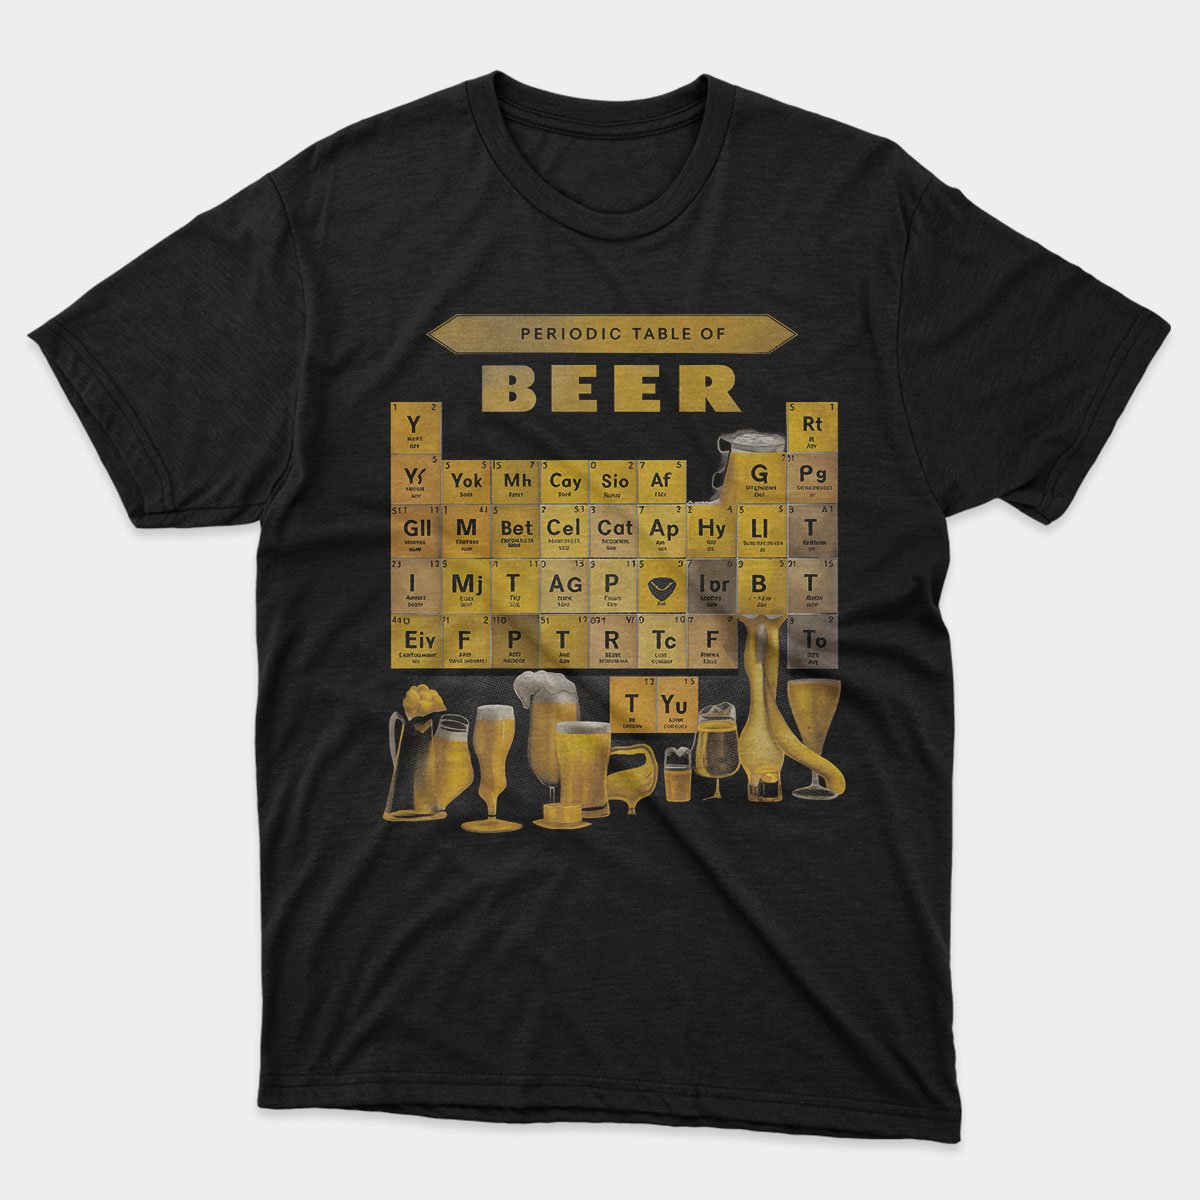 write for me short (160 max characters) and long product description (200 characters) and meta description (max 150 characters) i selling funny t shirt, need seo friendly create product tittle for me keyword is "funny beer t shirt" t-shirt design : Periodic Table Of Beer T-shirt